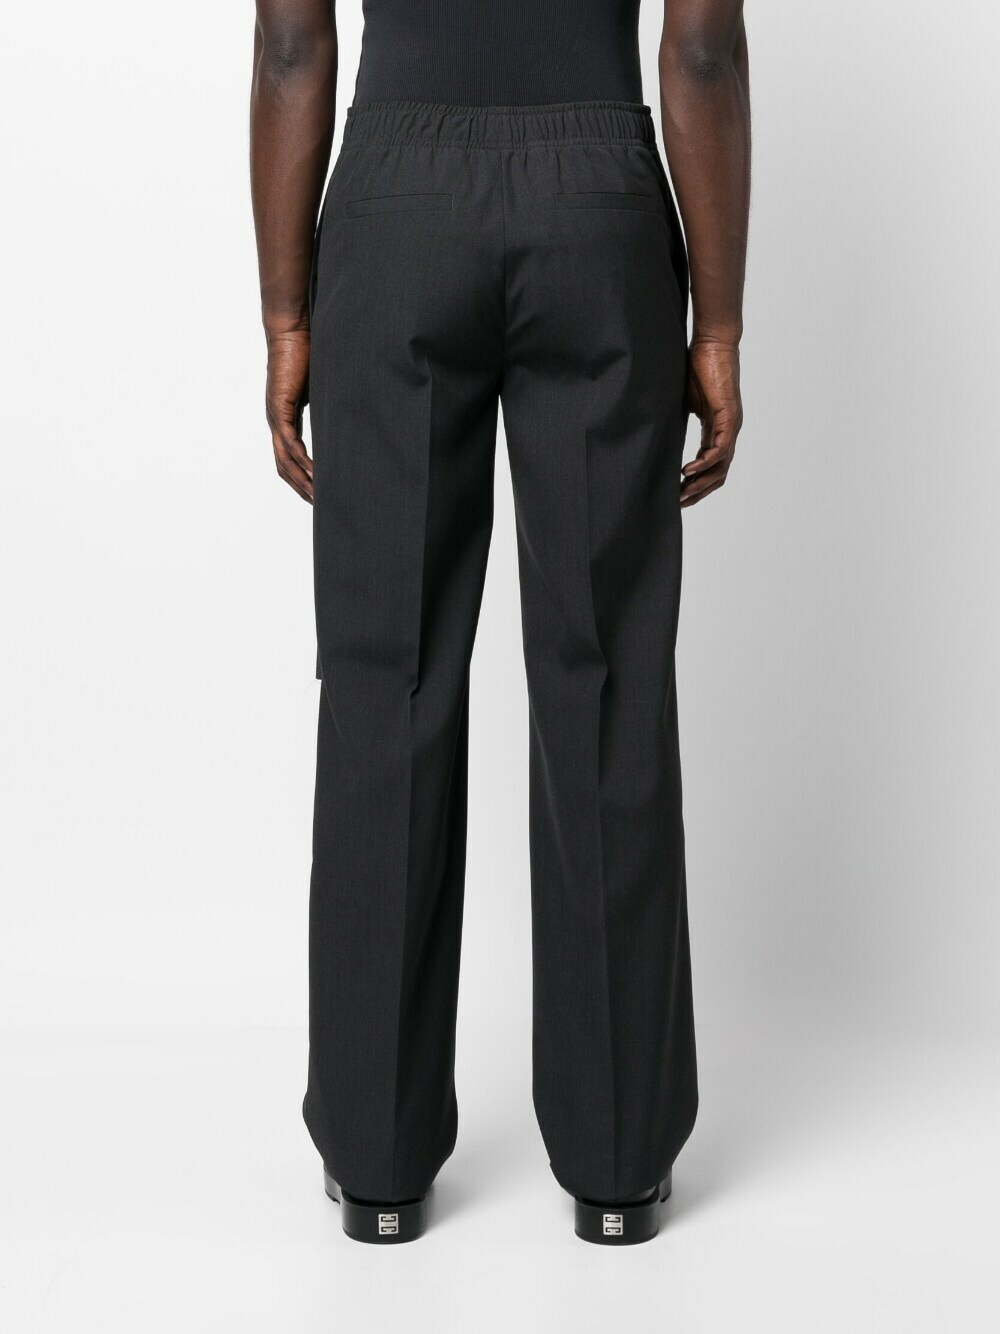 Givenchy trousers for men's | Shop online at THEBS